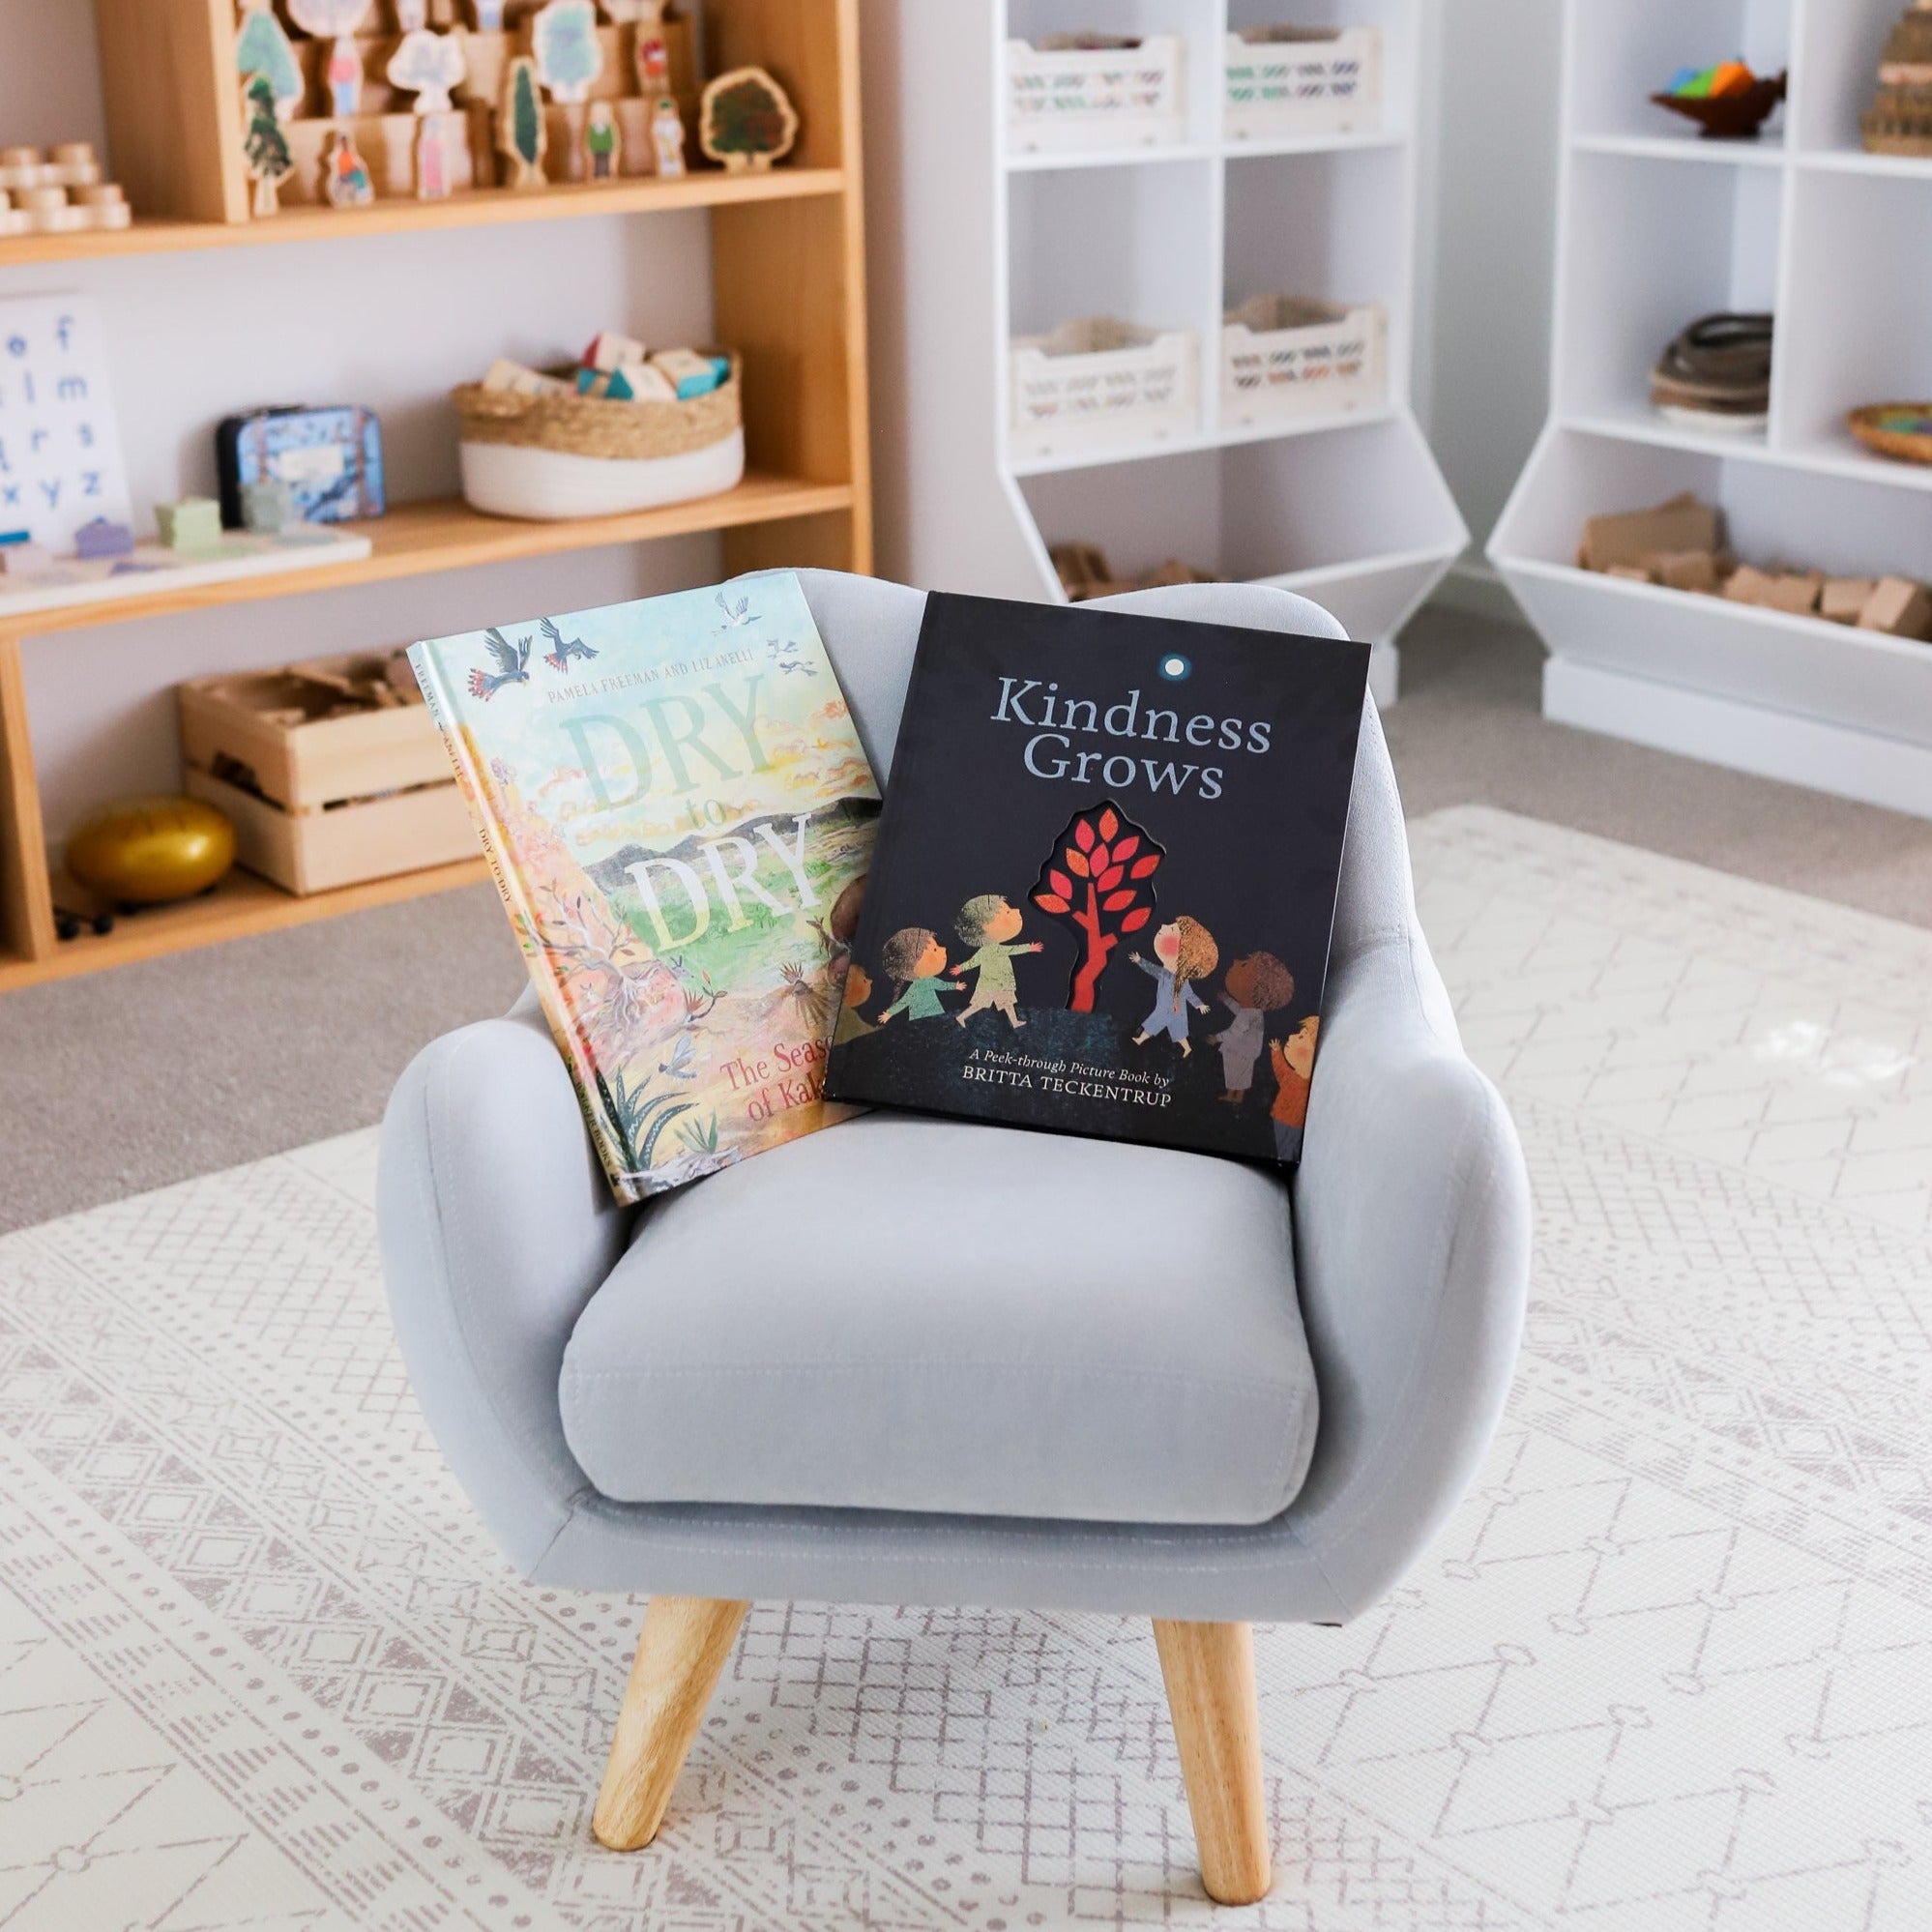 books from the family box displayed on comfy chair in play room